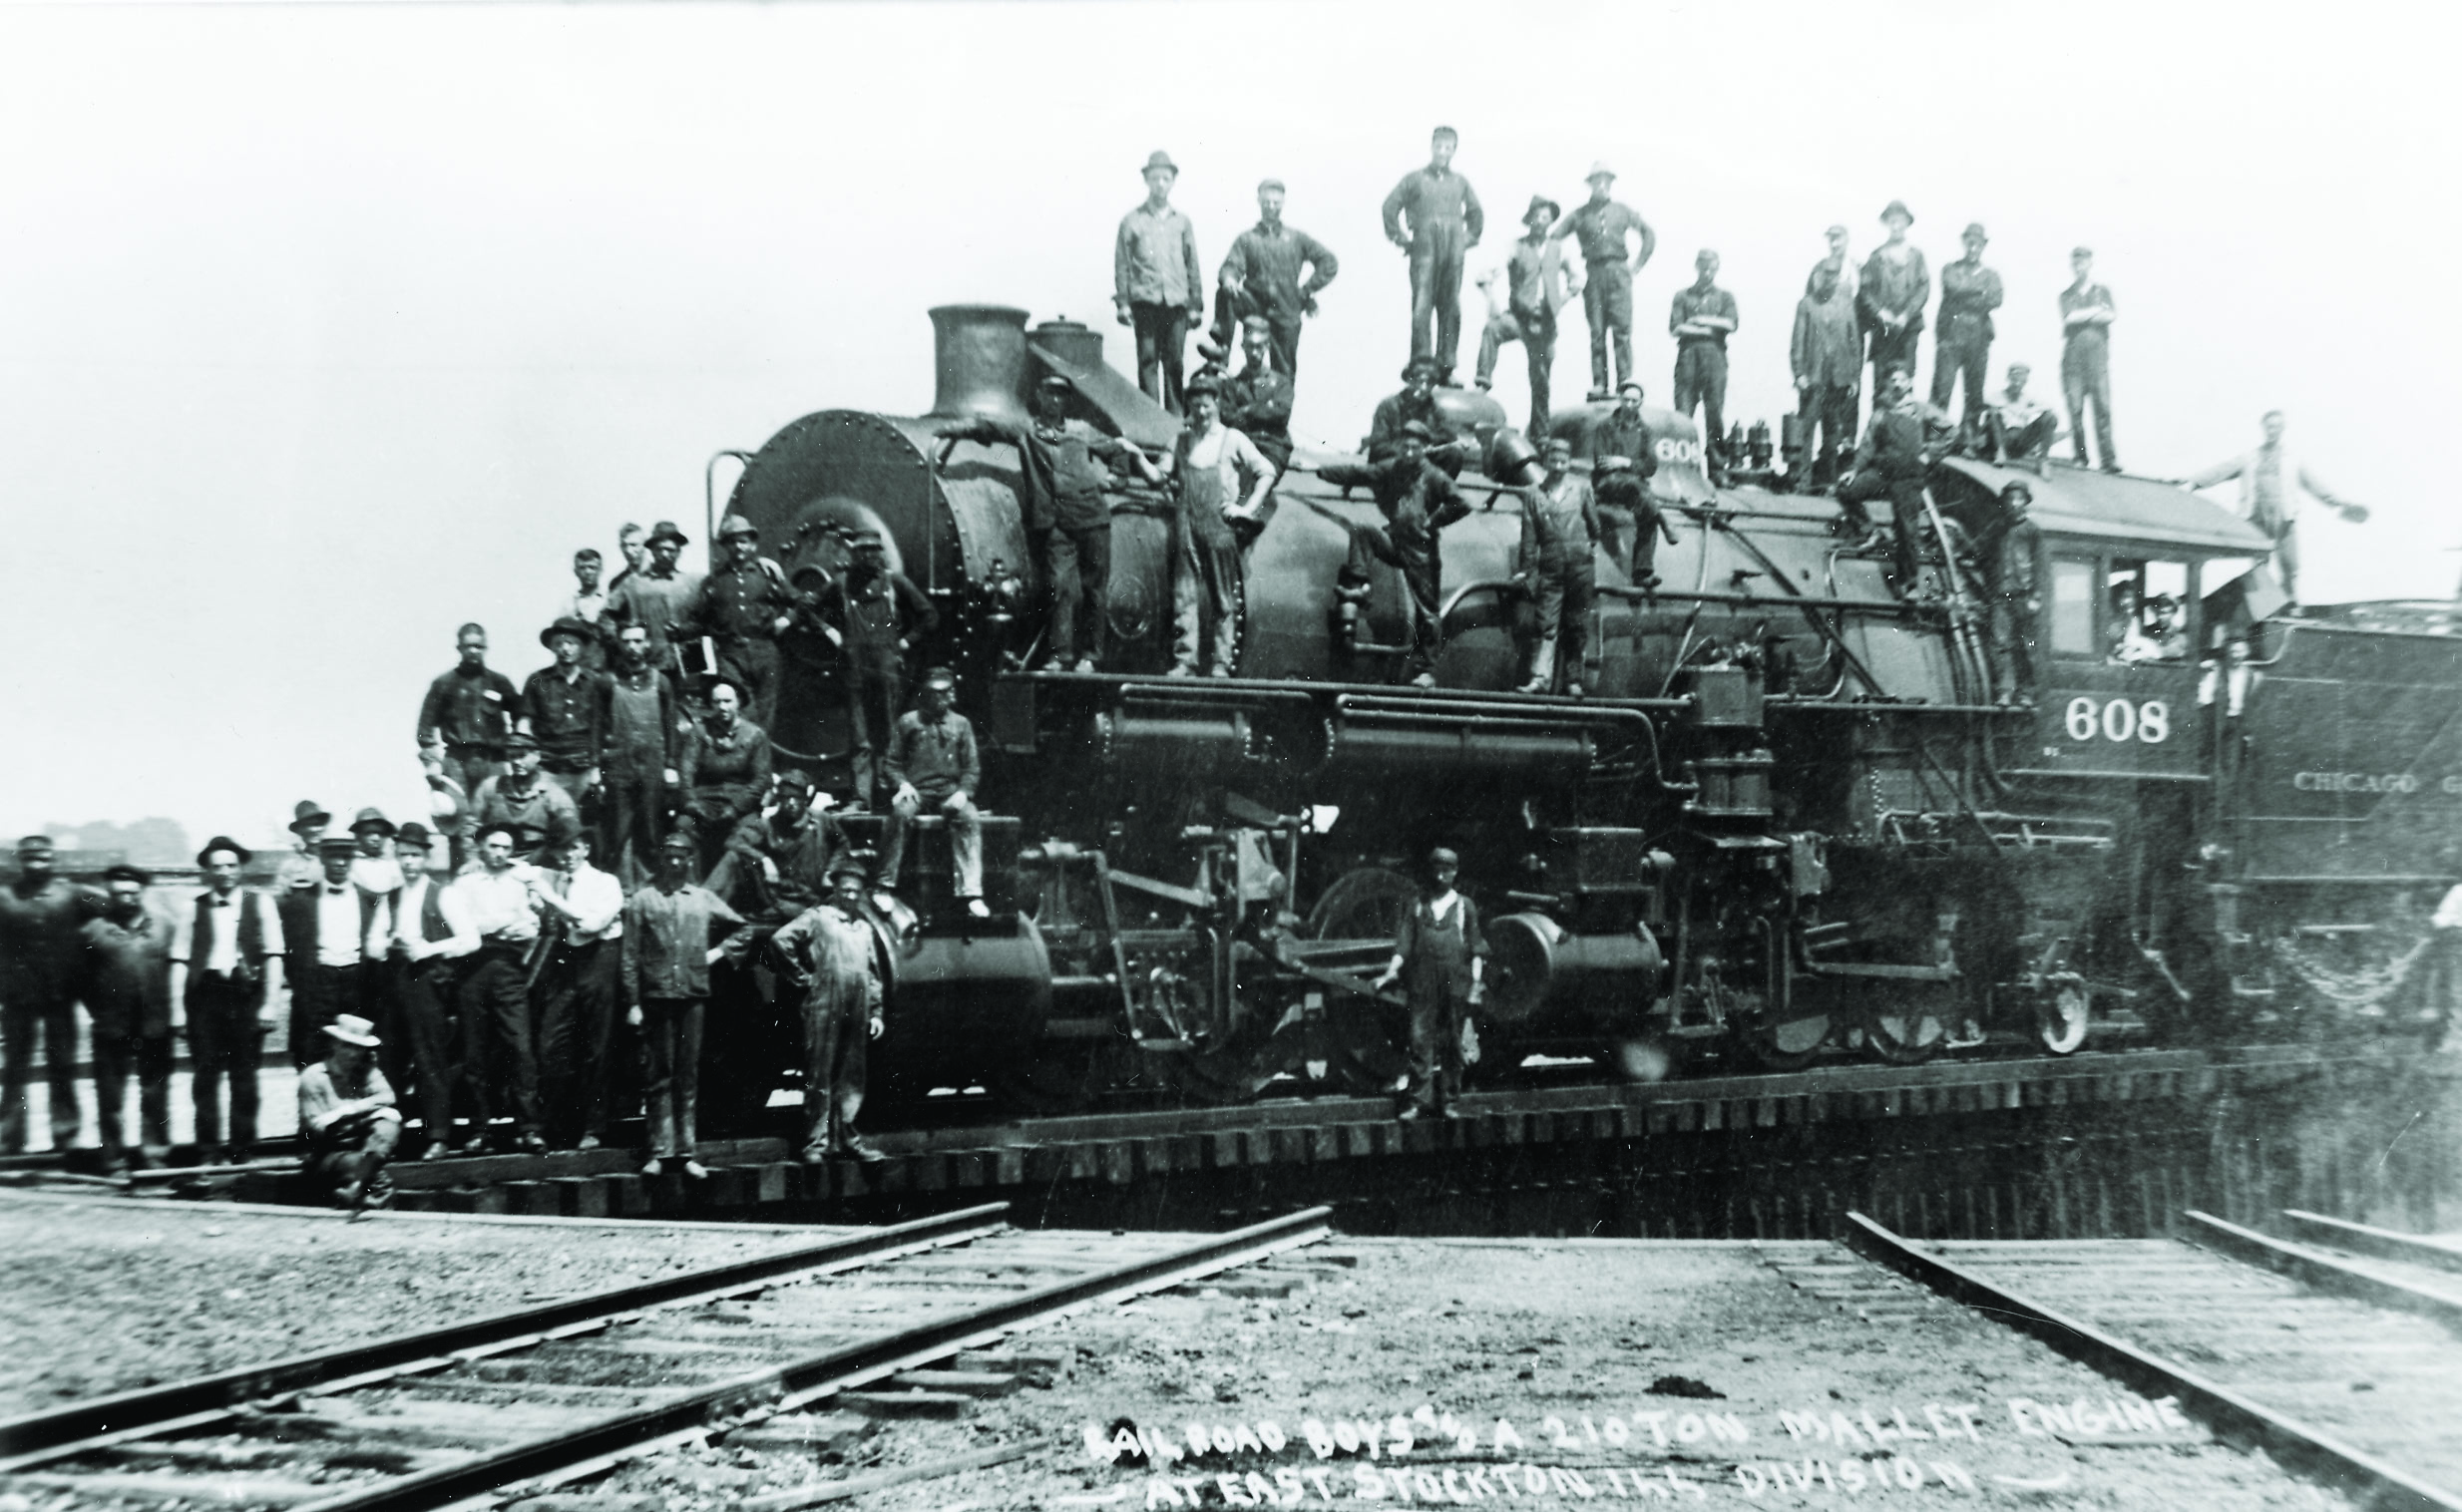 Men standing on and near steam locomotive spotted on turntable